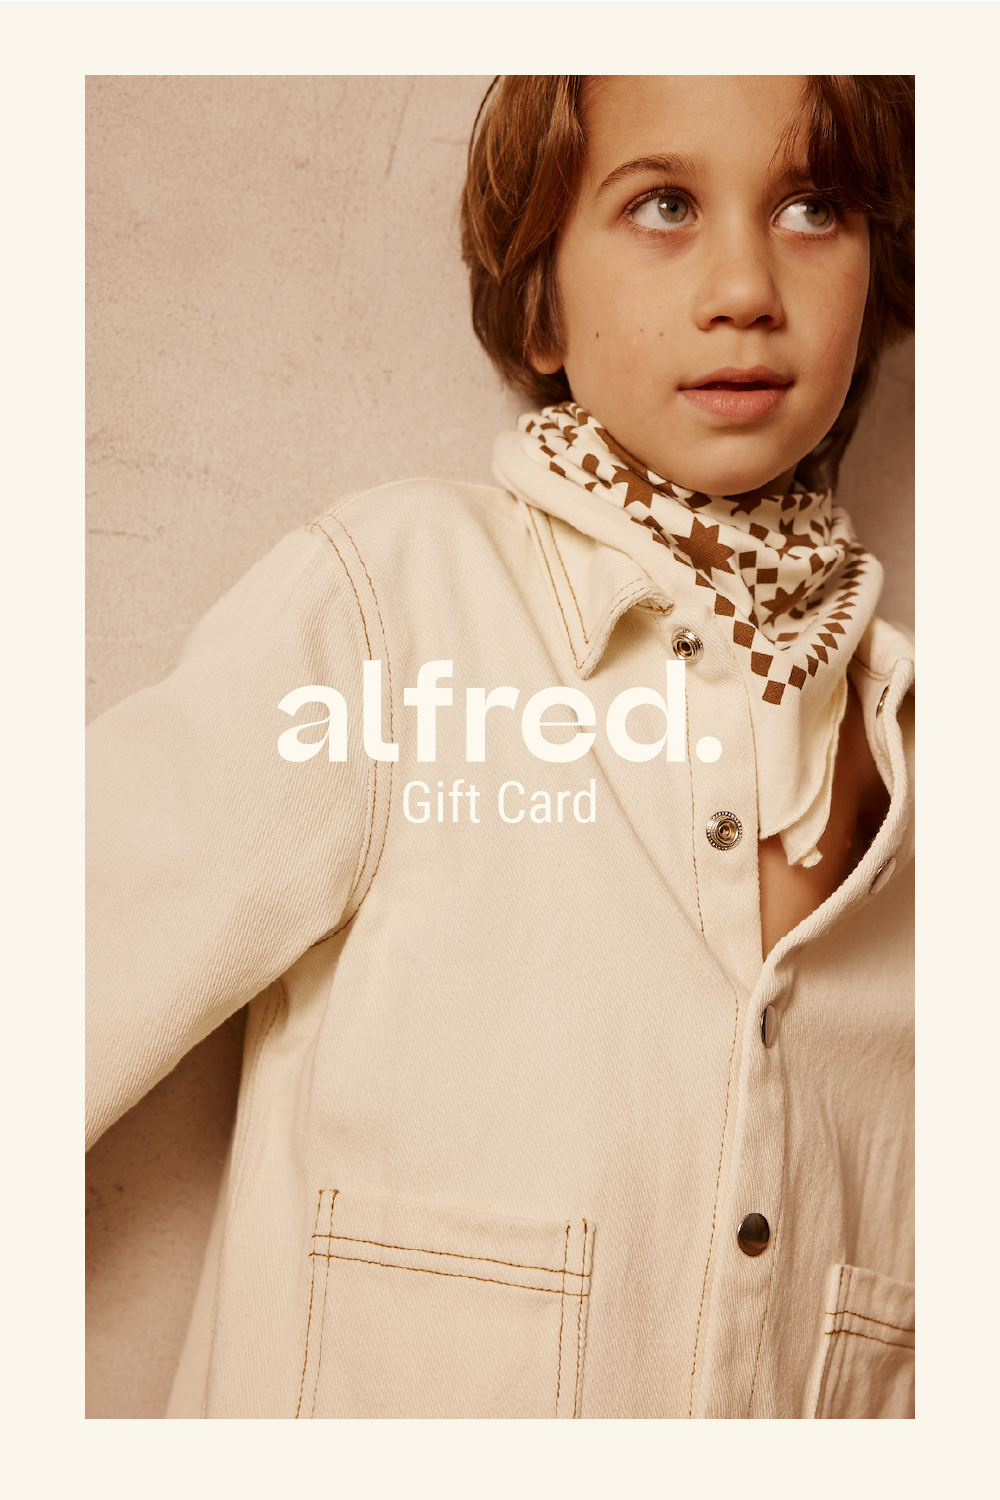 Alfred. Gift Card